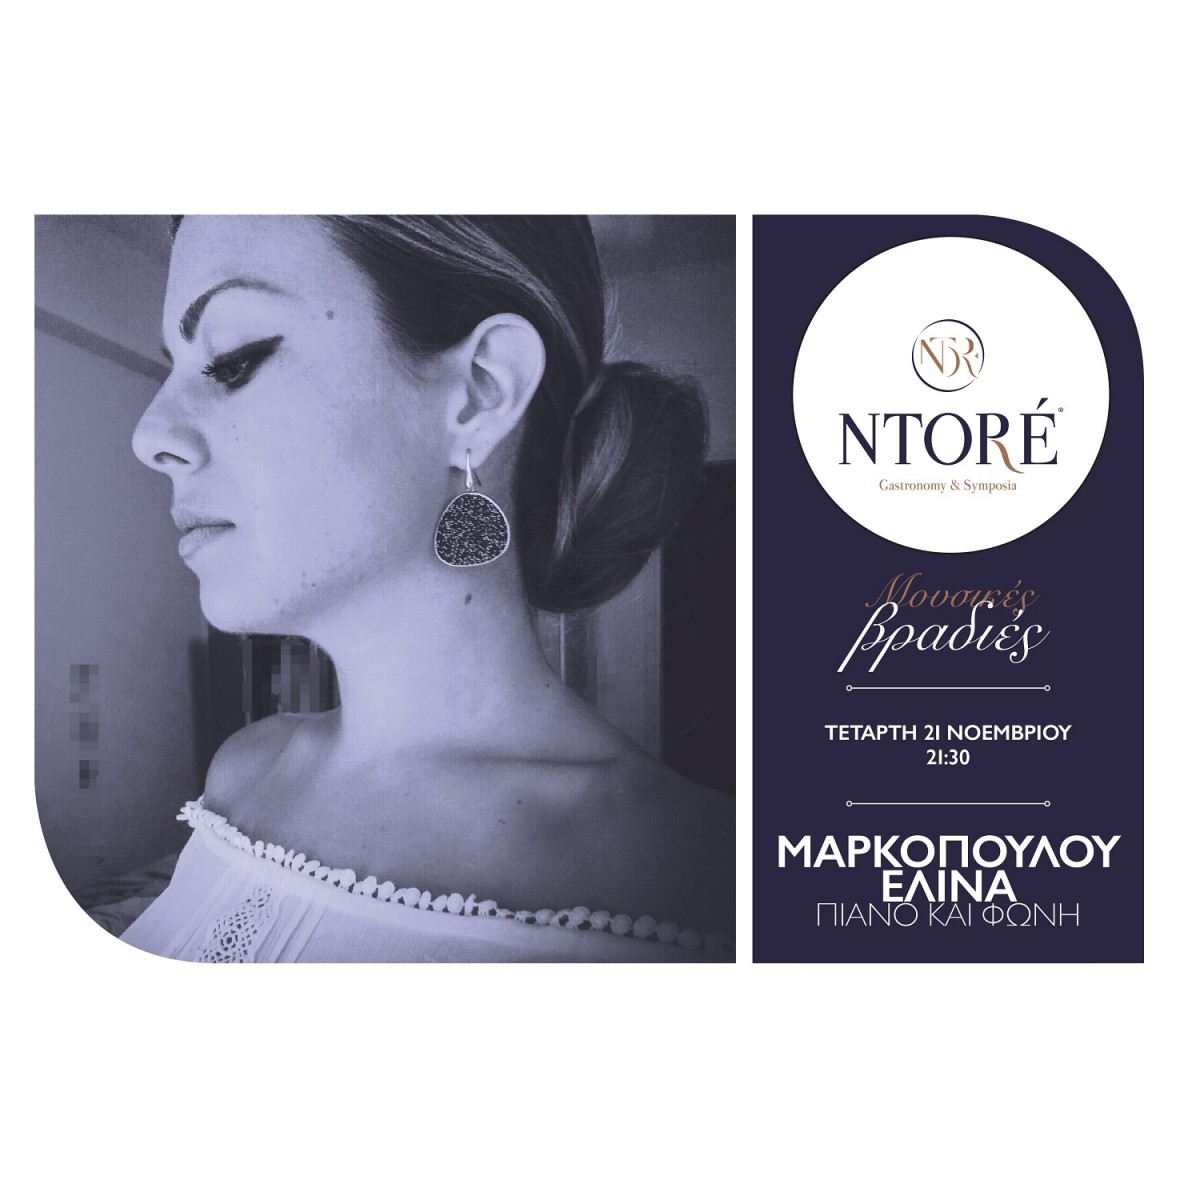 Music nights at NTORE with Elina Markopoulou on Wednesday 21st of November